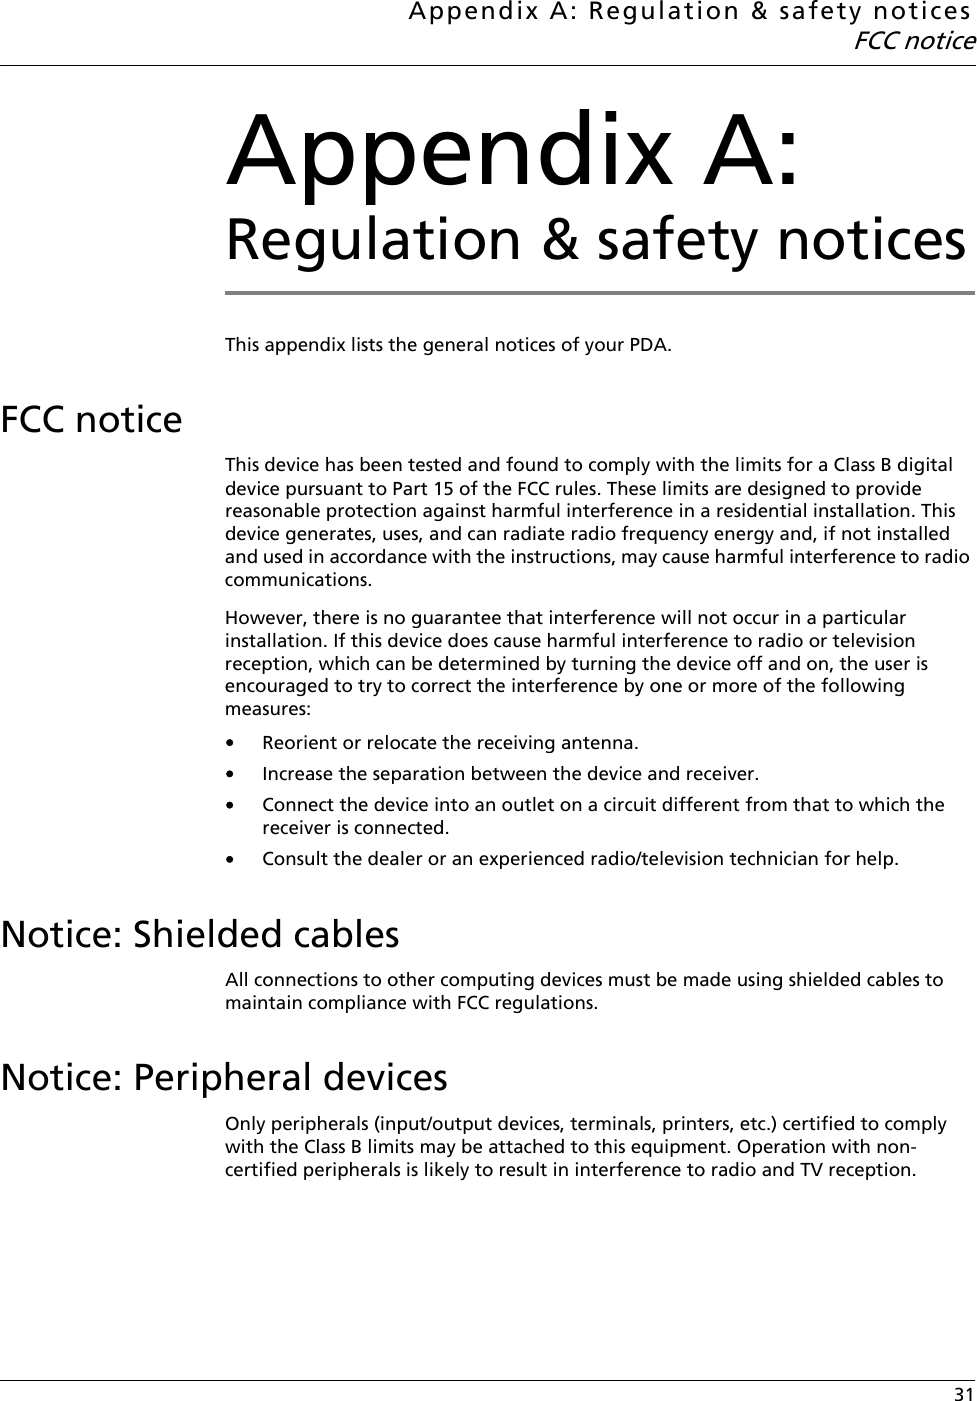 Appendix A: Regulation &amp; safety noticesFCC notice 31Appendix A: Regulation &amp; safety noticesThis appendix lists the general notices of your PDA.FCC noticeThis device has been tested and found to comply with the limits for a Class B digital device pursuant to Part 15 of the FCC rules. These limits are designed to provide reasonable protection against harmful interference in a residential installation. This device generates, uses, and can radiate radio frequency energy and, if not installed and used in accordance with the instructions, may cause harmful interference to radio communications.However, there is no guarantee that interference will not occur in a particular installation. If this device does cause harmful interference to radio or television reception, which can be determined by turning the device off and on, the user is encouraged to try to correct the interference by one or more of the following measures:•Reorient or relocate the receiving antenna.•Increase the separation between the device and receiver.•Connect the device into an outlet on a circuit different from that to which the receiver is connected.•Consult the dealer or an experienced radio/television technician for help.Notice: Shielded cablesAll connections to other computing devices must be made using shielded cables to maintain compliance with FCC regulations.Notice: Peripheral devicesOnly peripherals (input/output devices, terminals, printers, etc.) certified to comply with the Class B limits may be attached to this equipment. Operation with non-certified peripherals is likely to result in interference to radio and TV reception.